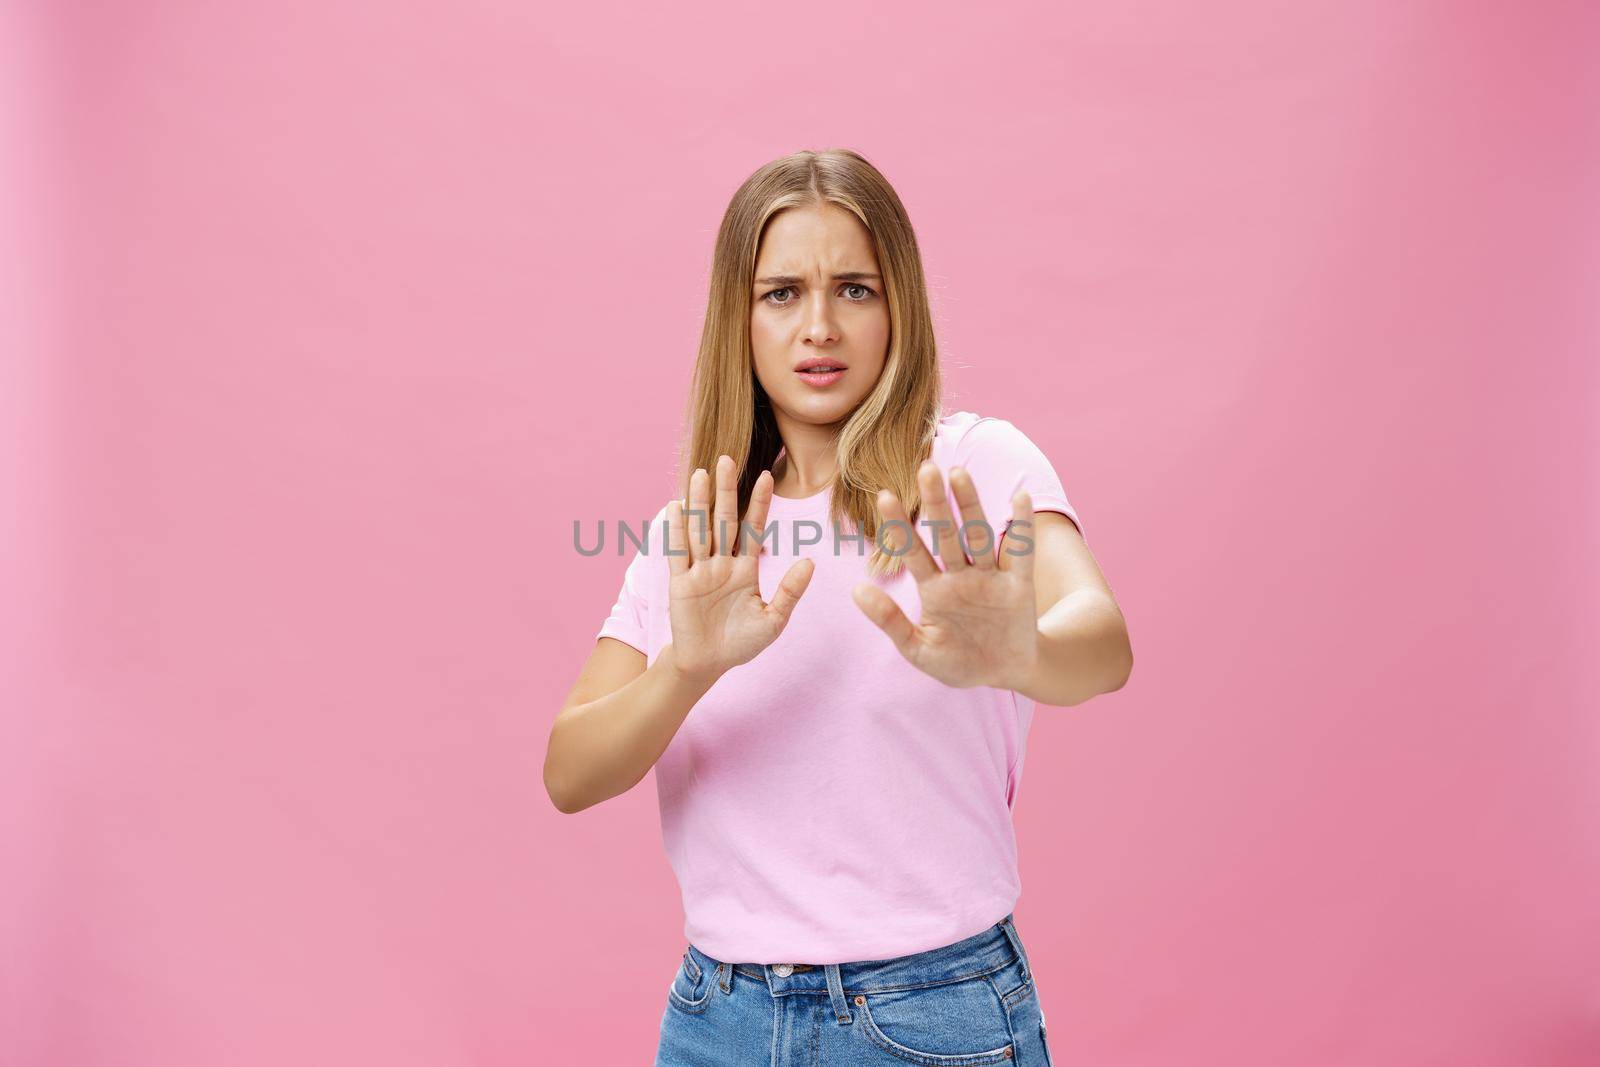 Stay away from me. Intense worried and displeased woman being victim of sexual harassment raising palms in defensive gesture making step backwards frowning asking stop, refusing over pink wall. Body language concept